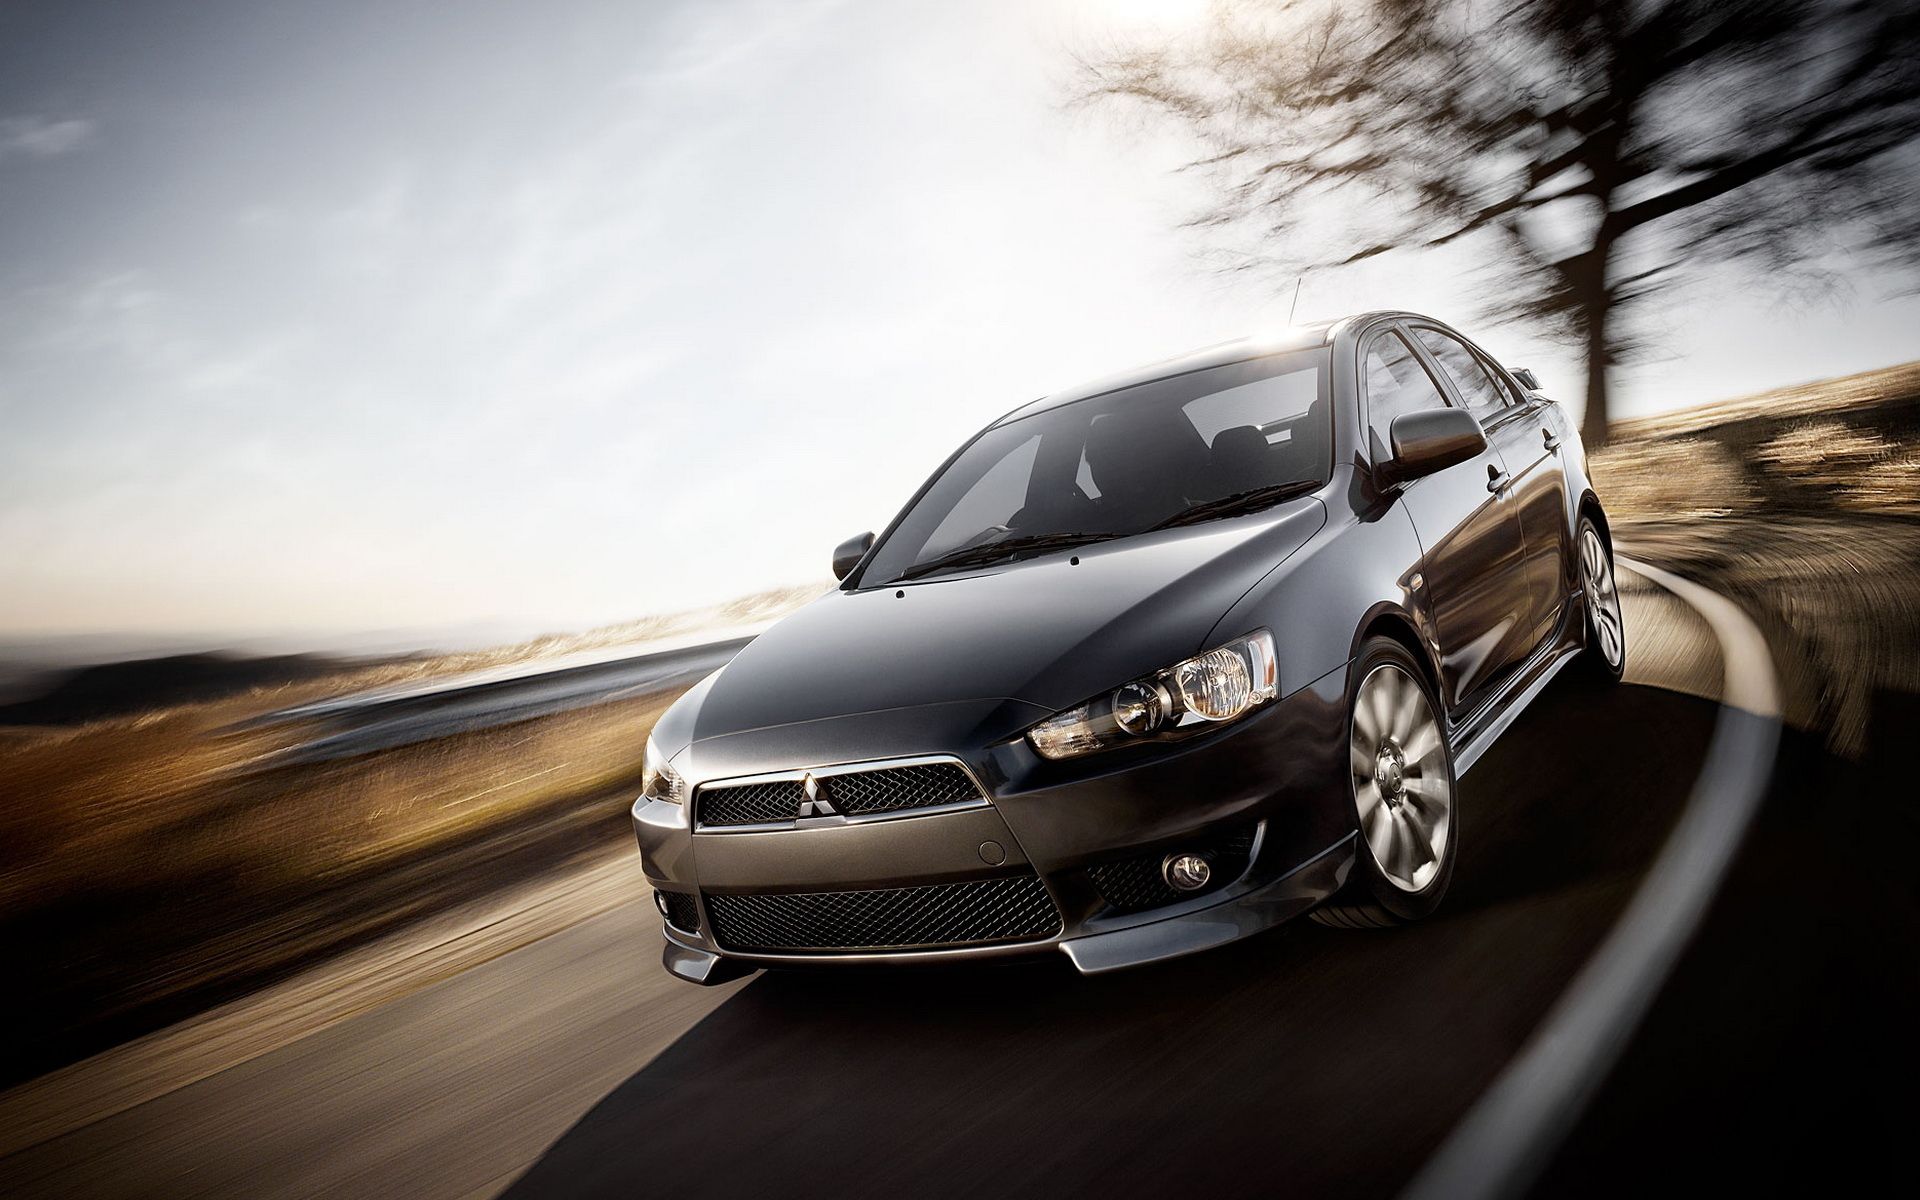 Mitsubishi Lancer Evolution X wallpapers and images - wallpapers ...